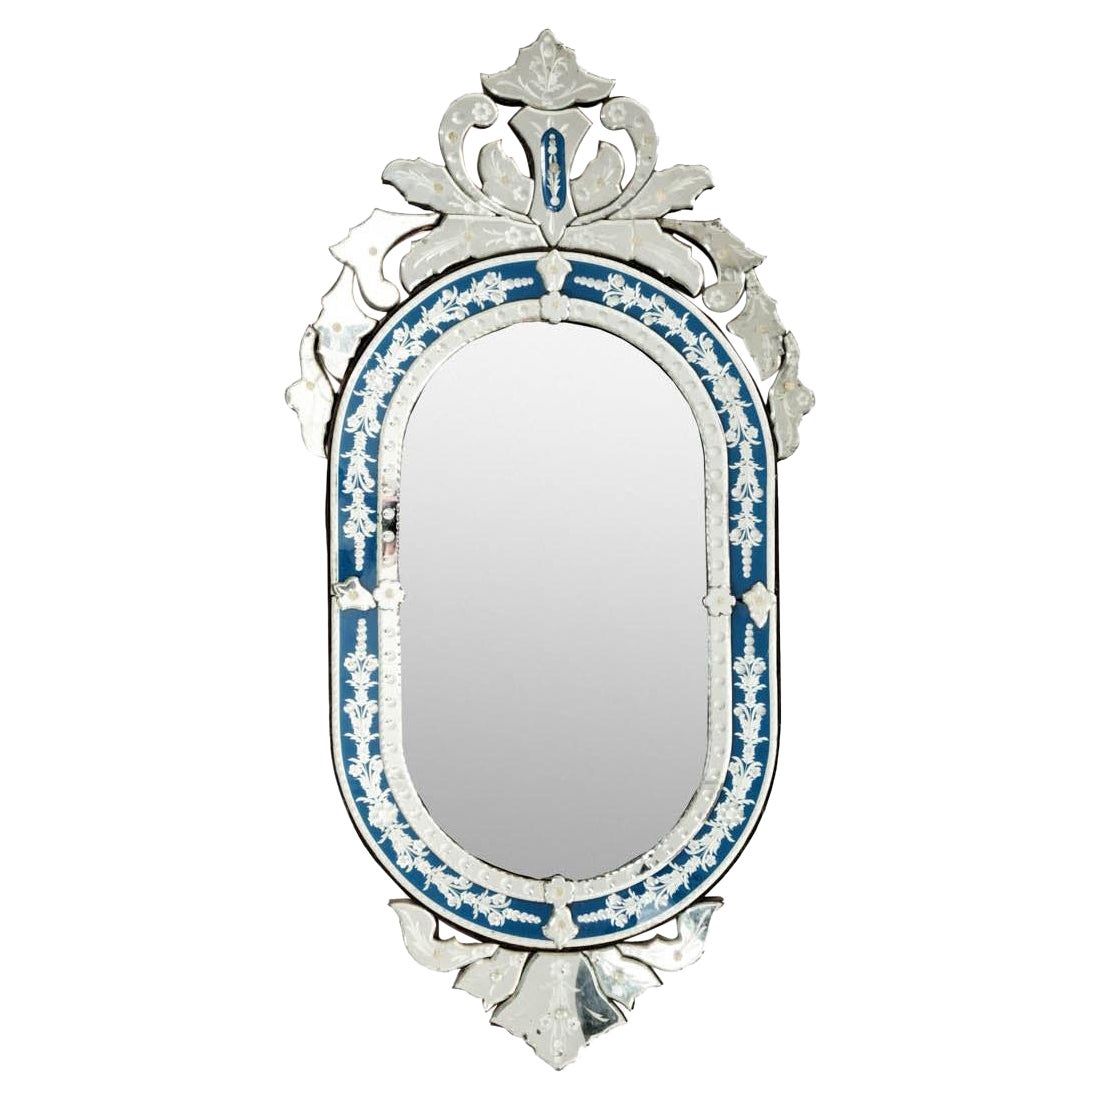 Highly Decorative 19th Century Venetian Glass Mirror For Sale